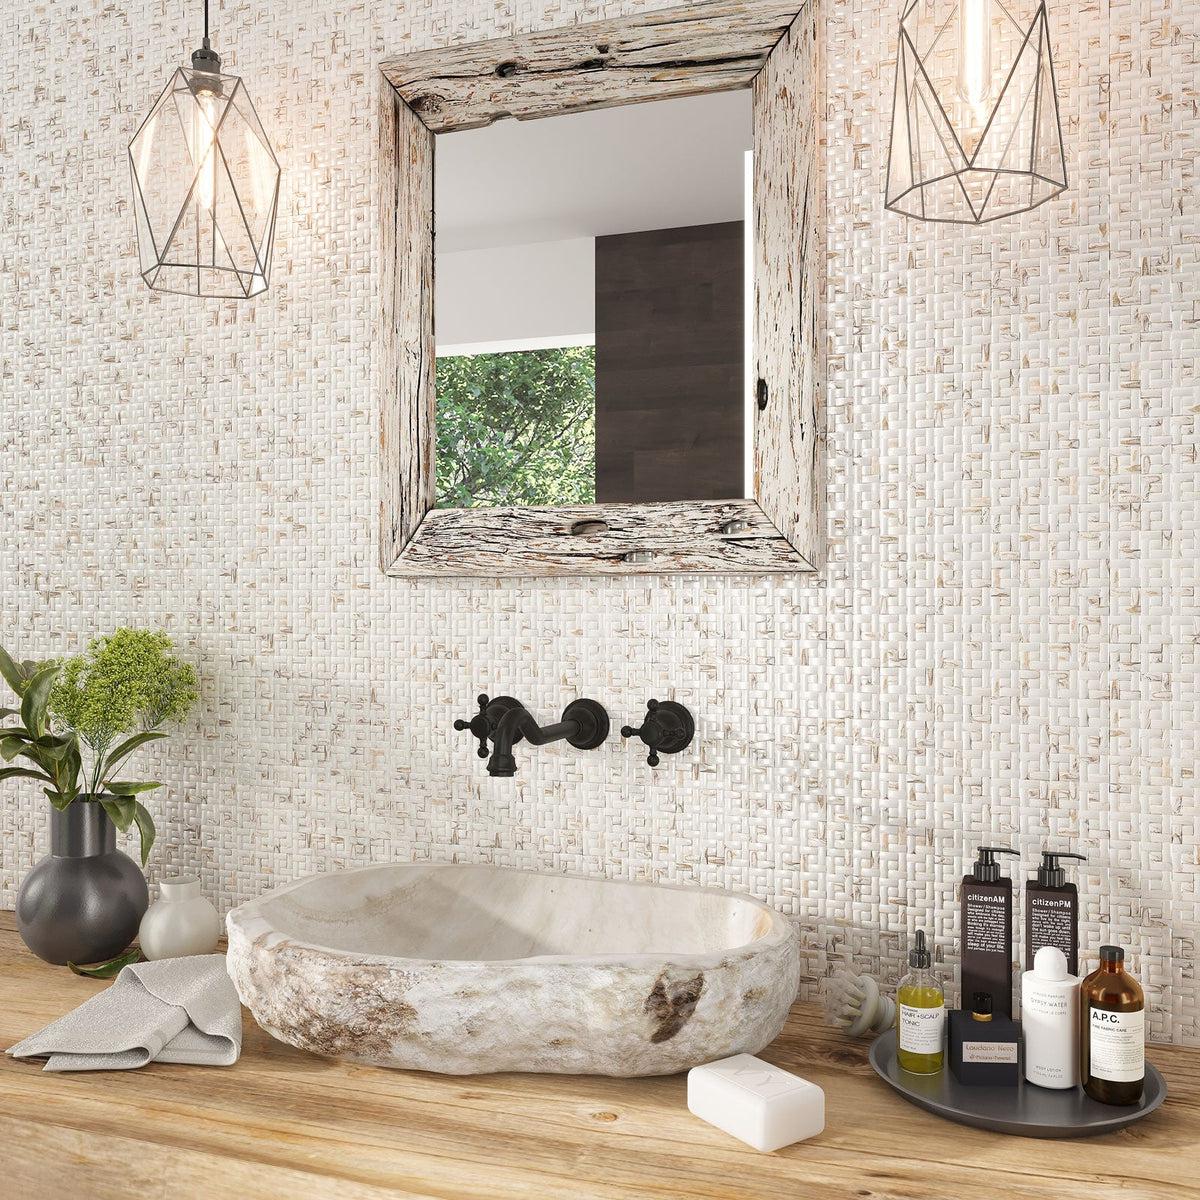 3D mother of pearl bathroom wall tile